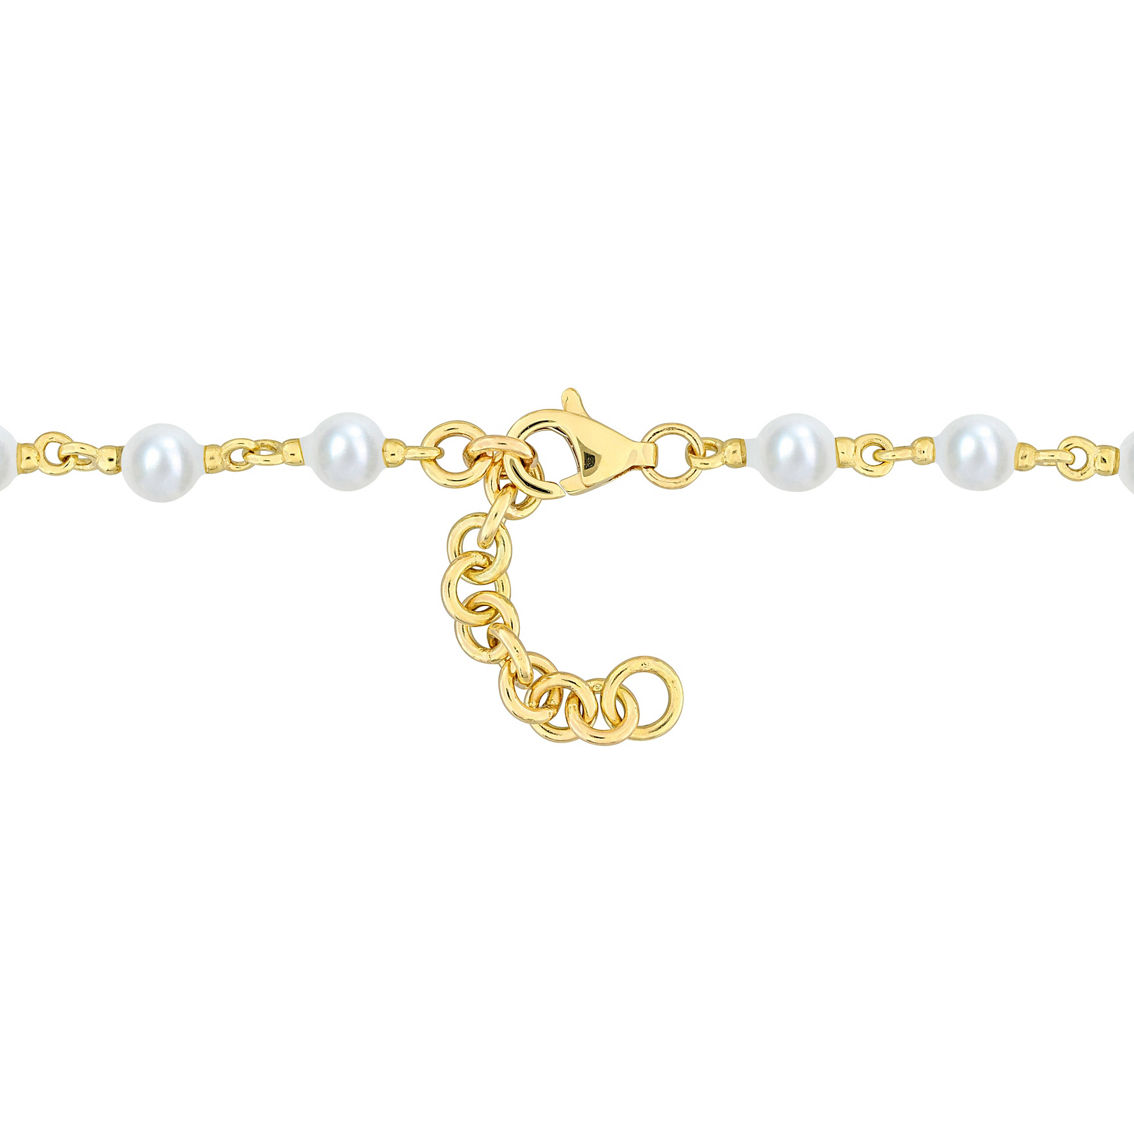 Sofia B. 10K Yellow Gold Cultured Freshwater Pearl 7.25 in. Station Bracelet - Image 2 of 5